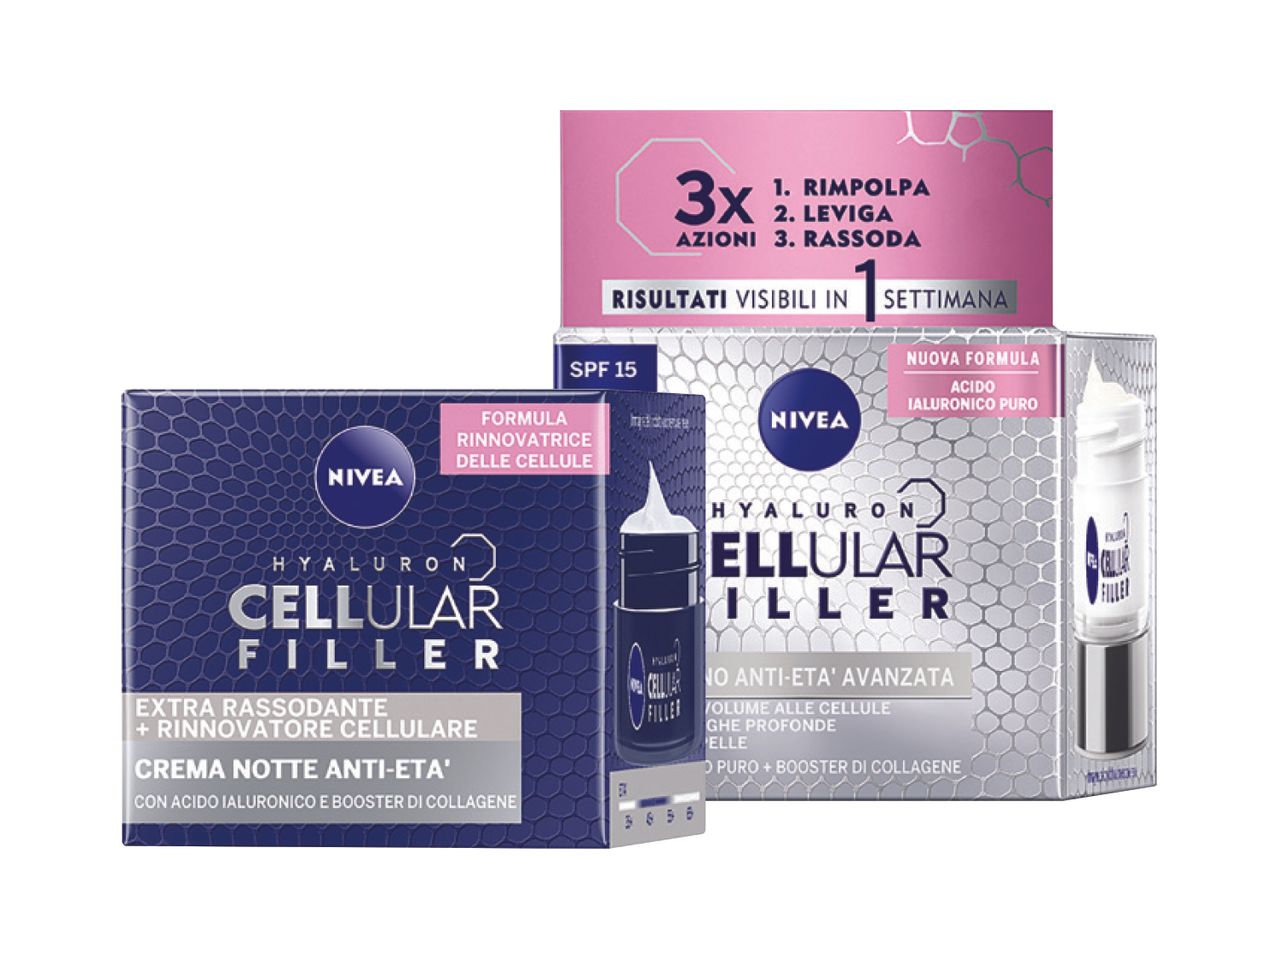 Go to full screen view: Hyaluron Cellular Filler Firming Cream - Image 1